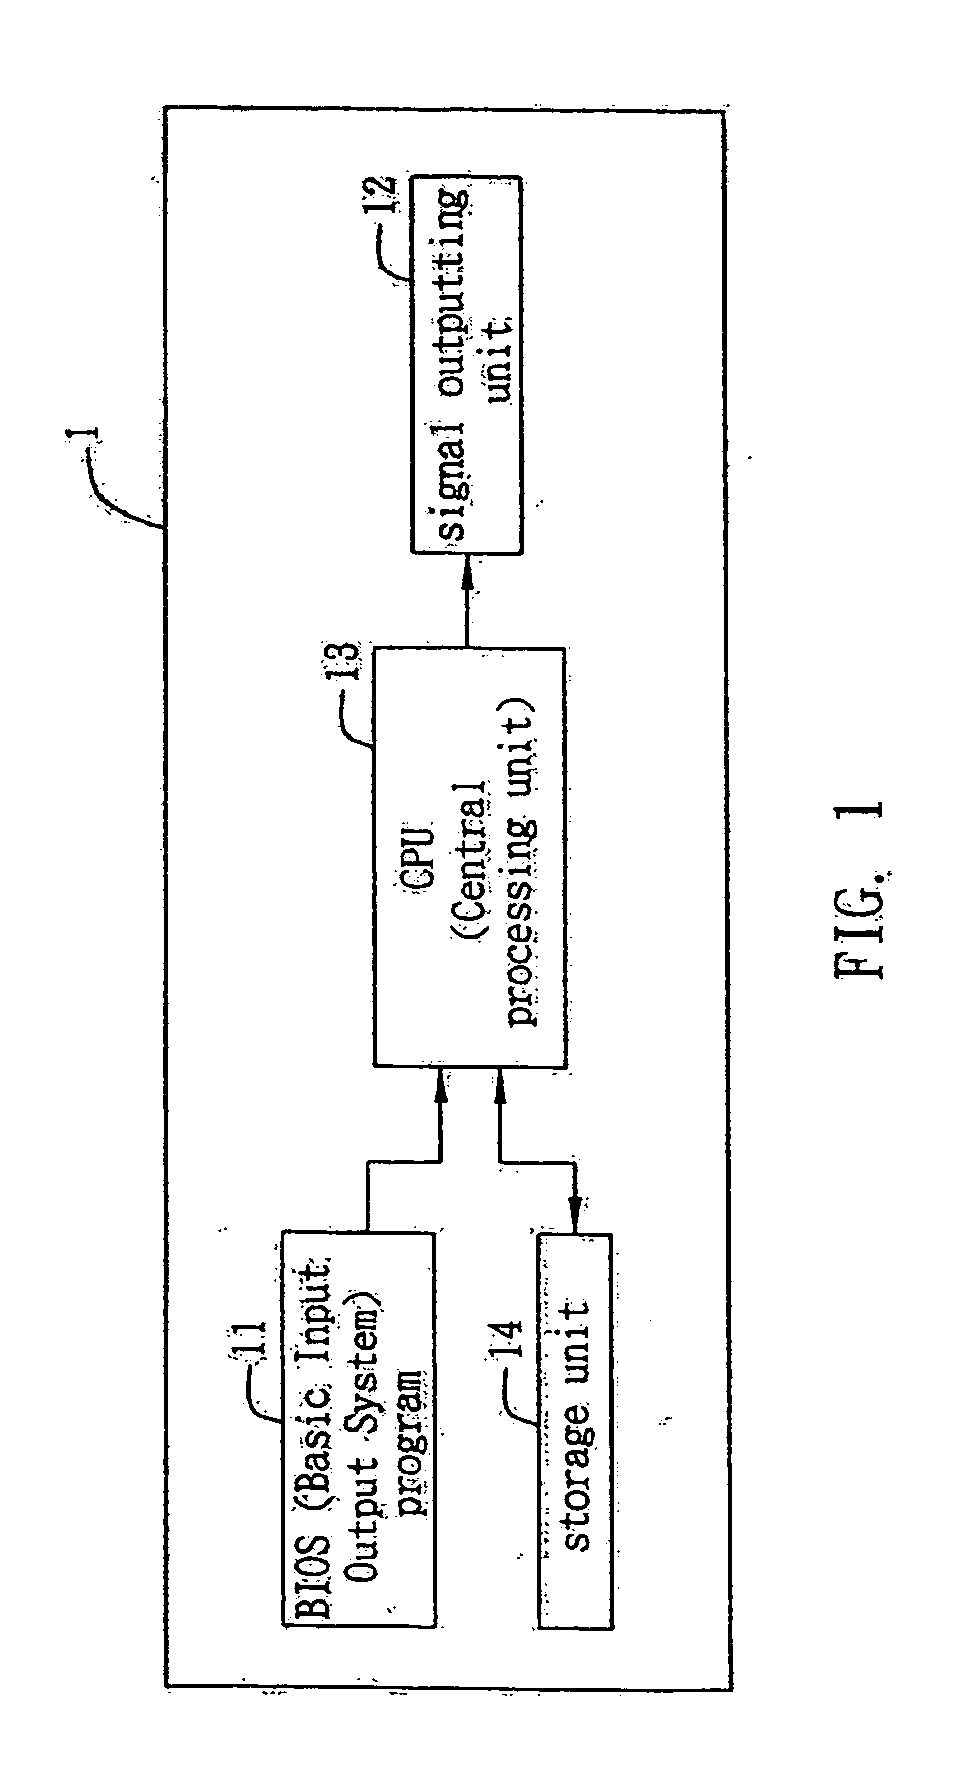 Power-on error detection system and method